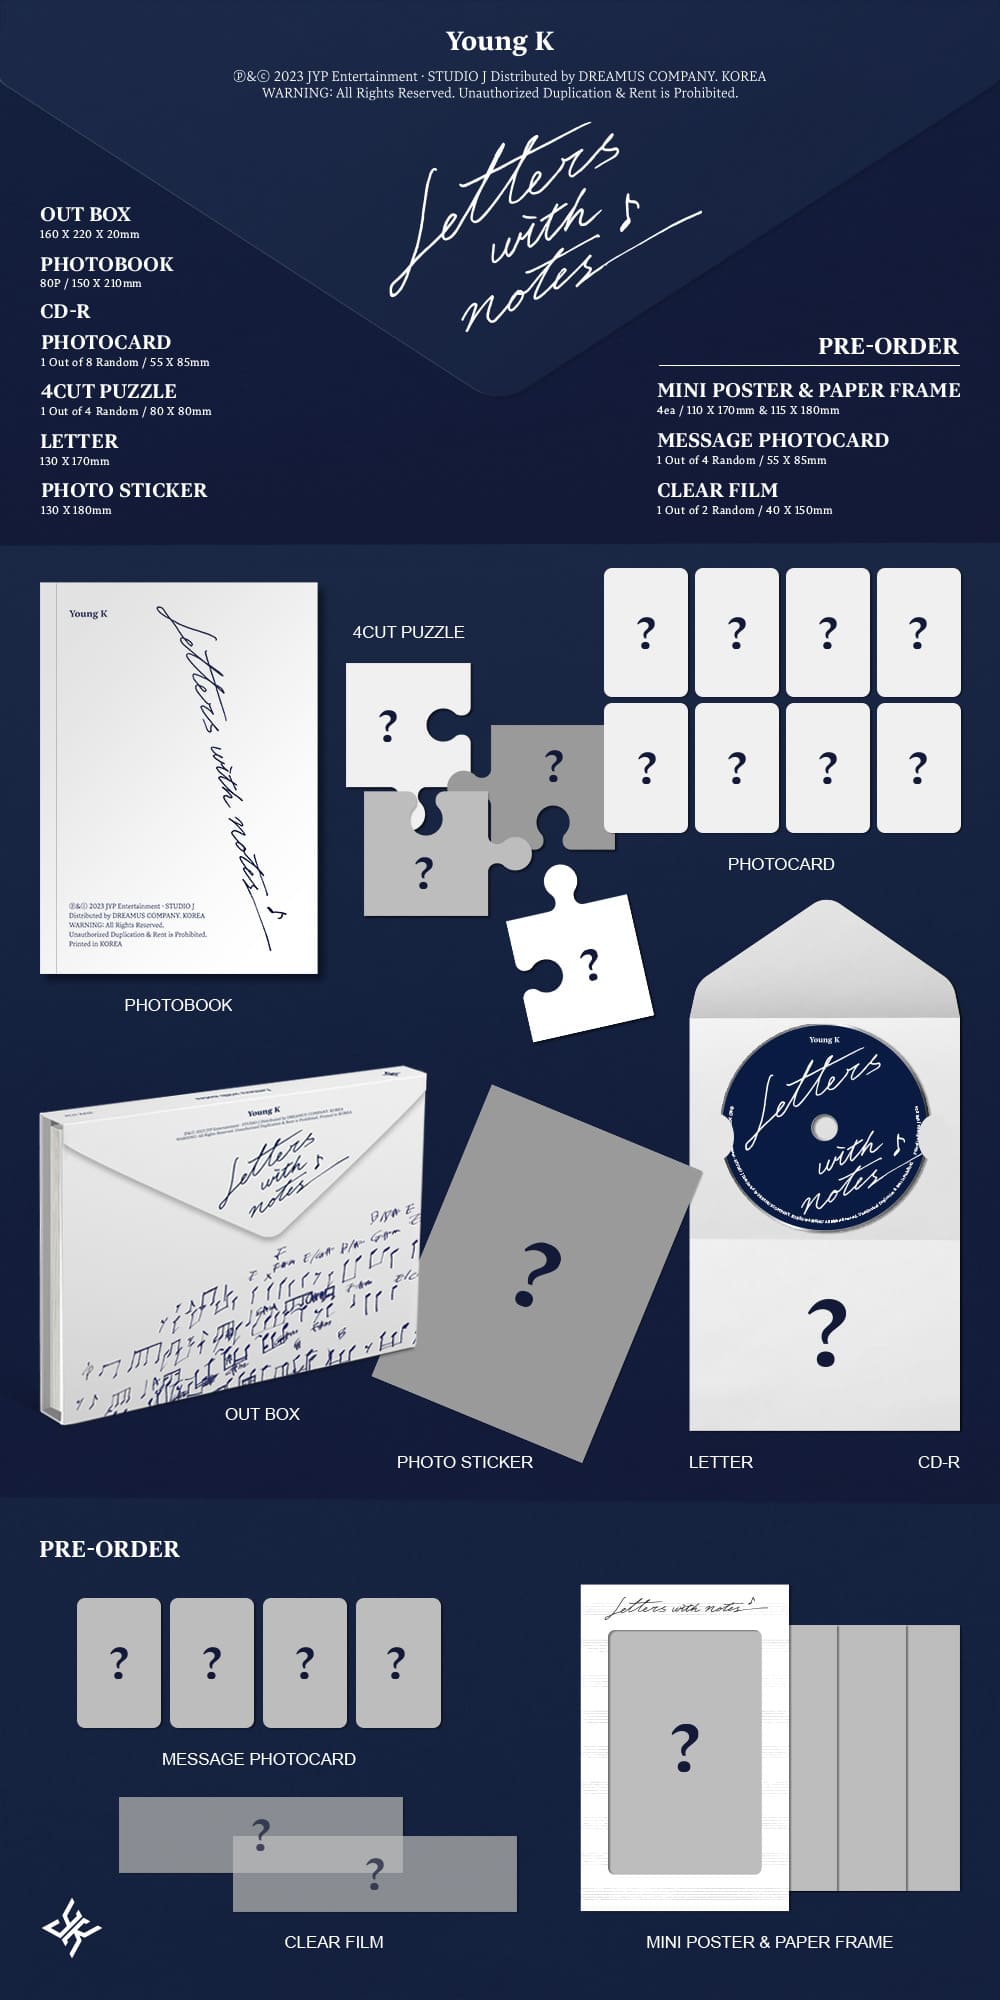 Young K (DAY6) 1st Full Album Letters with notes